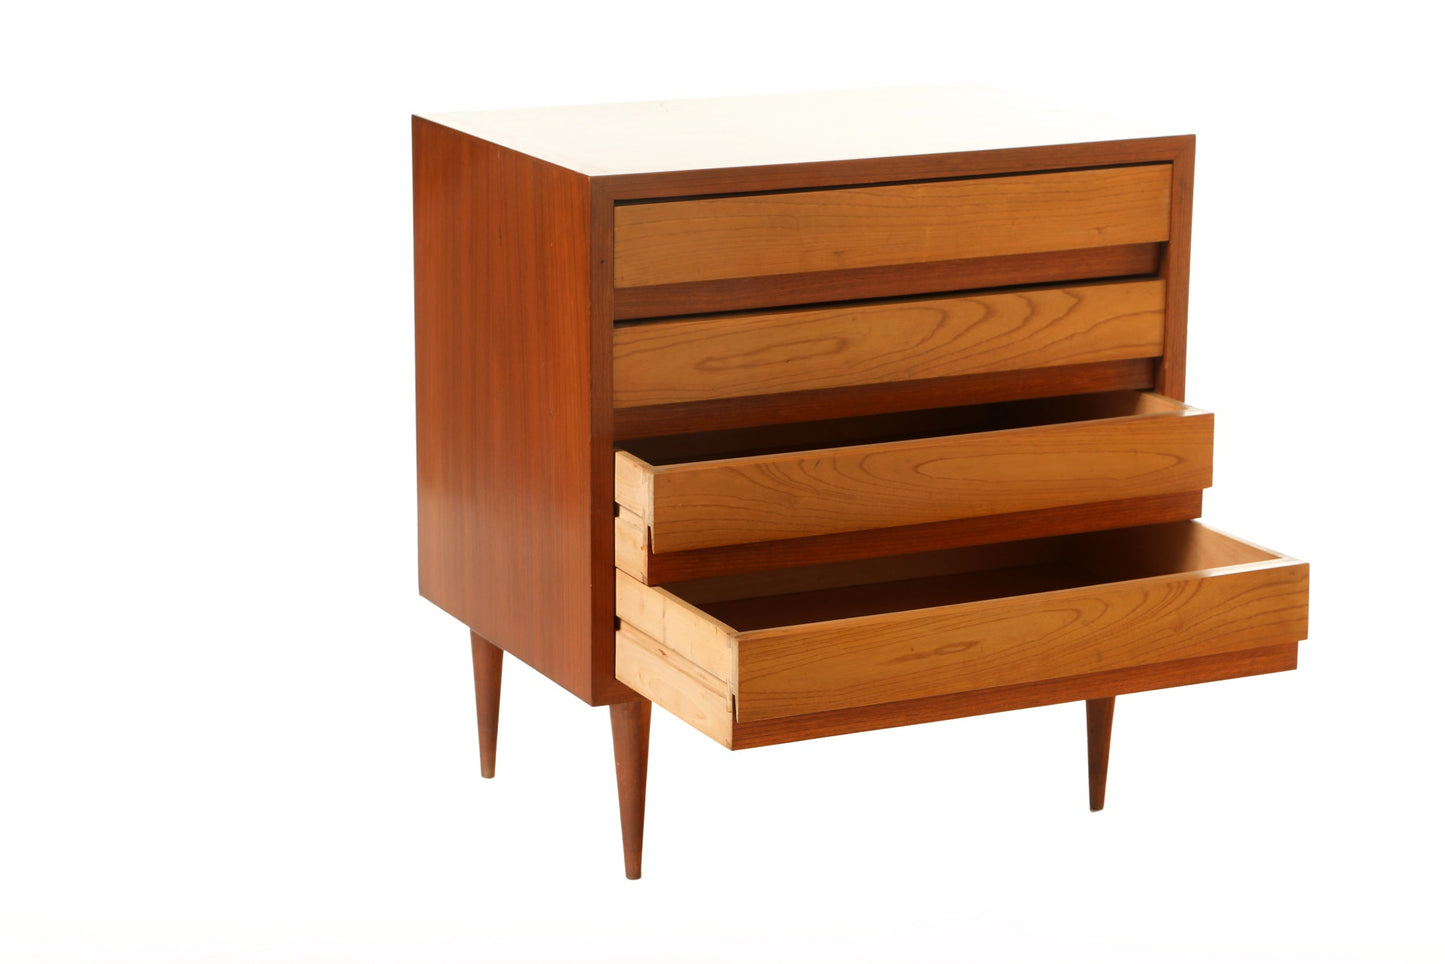 Small teak chest of drawers from the 70s